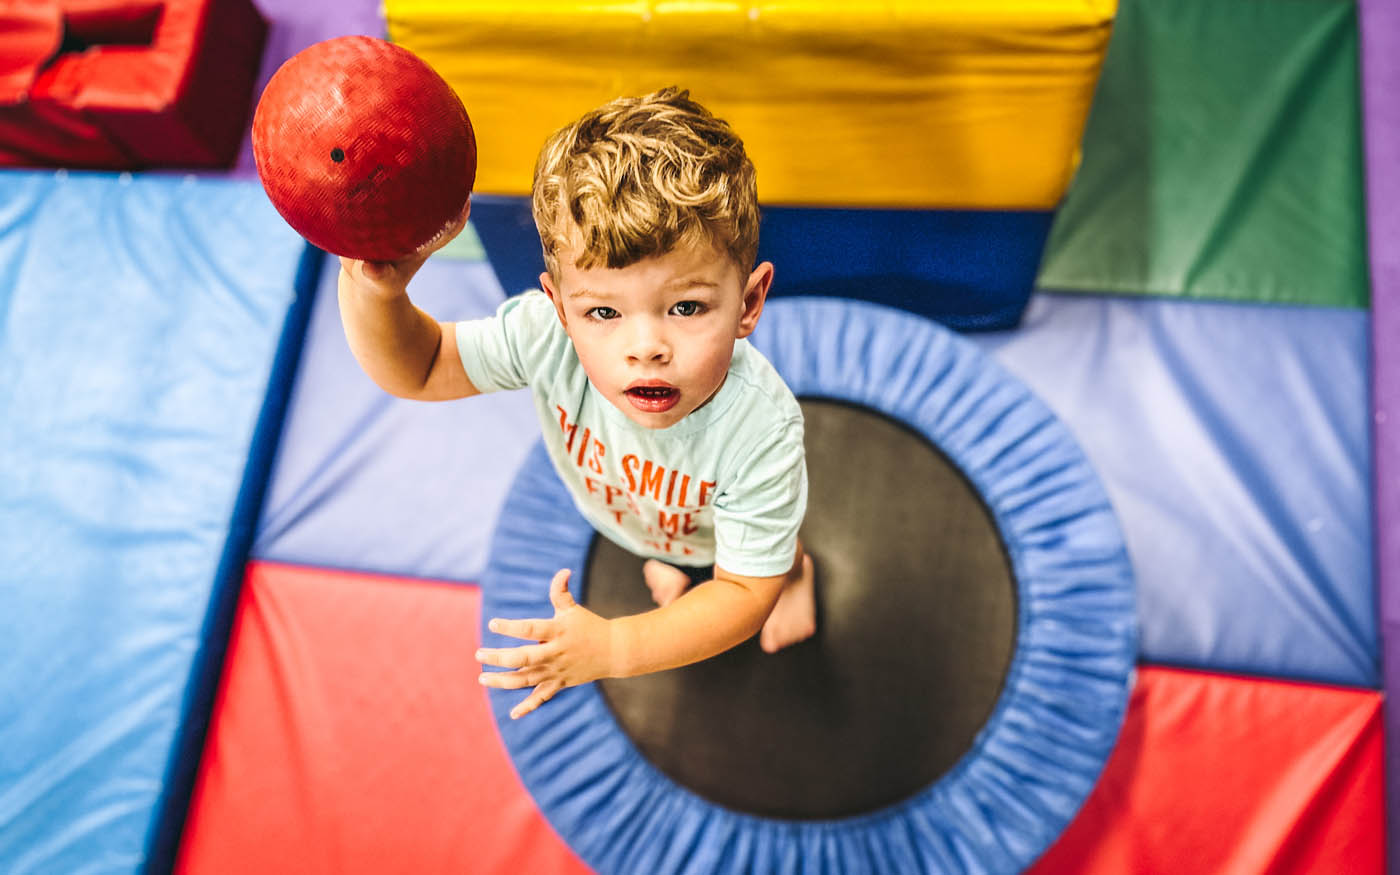 A toddler jumping on a Romp n' Roll tramp, learn more about our kids activities in Glen Allen, VA.